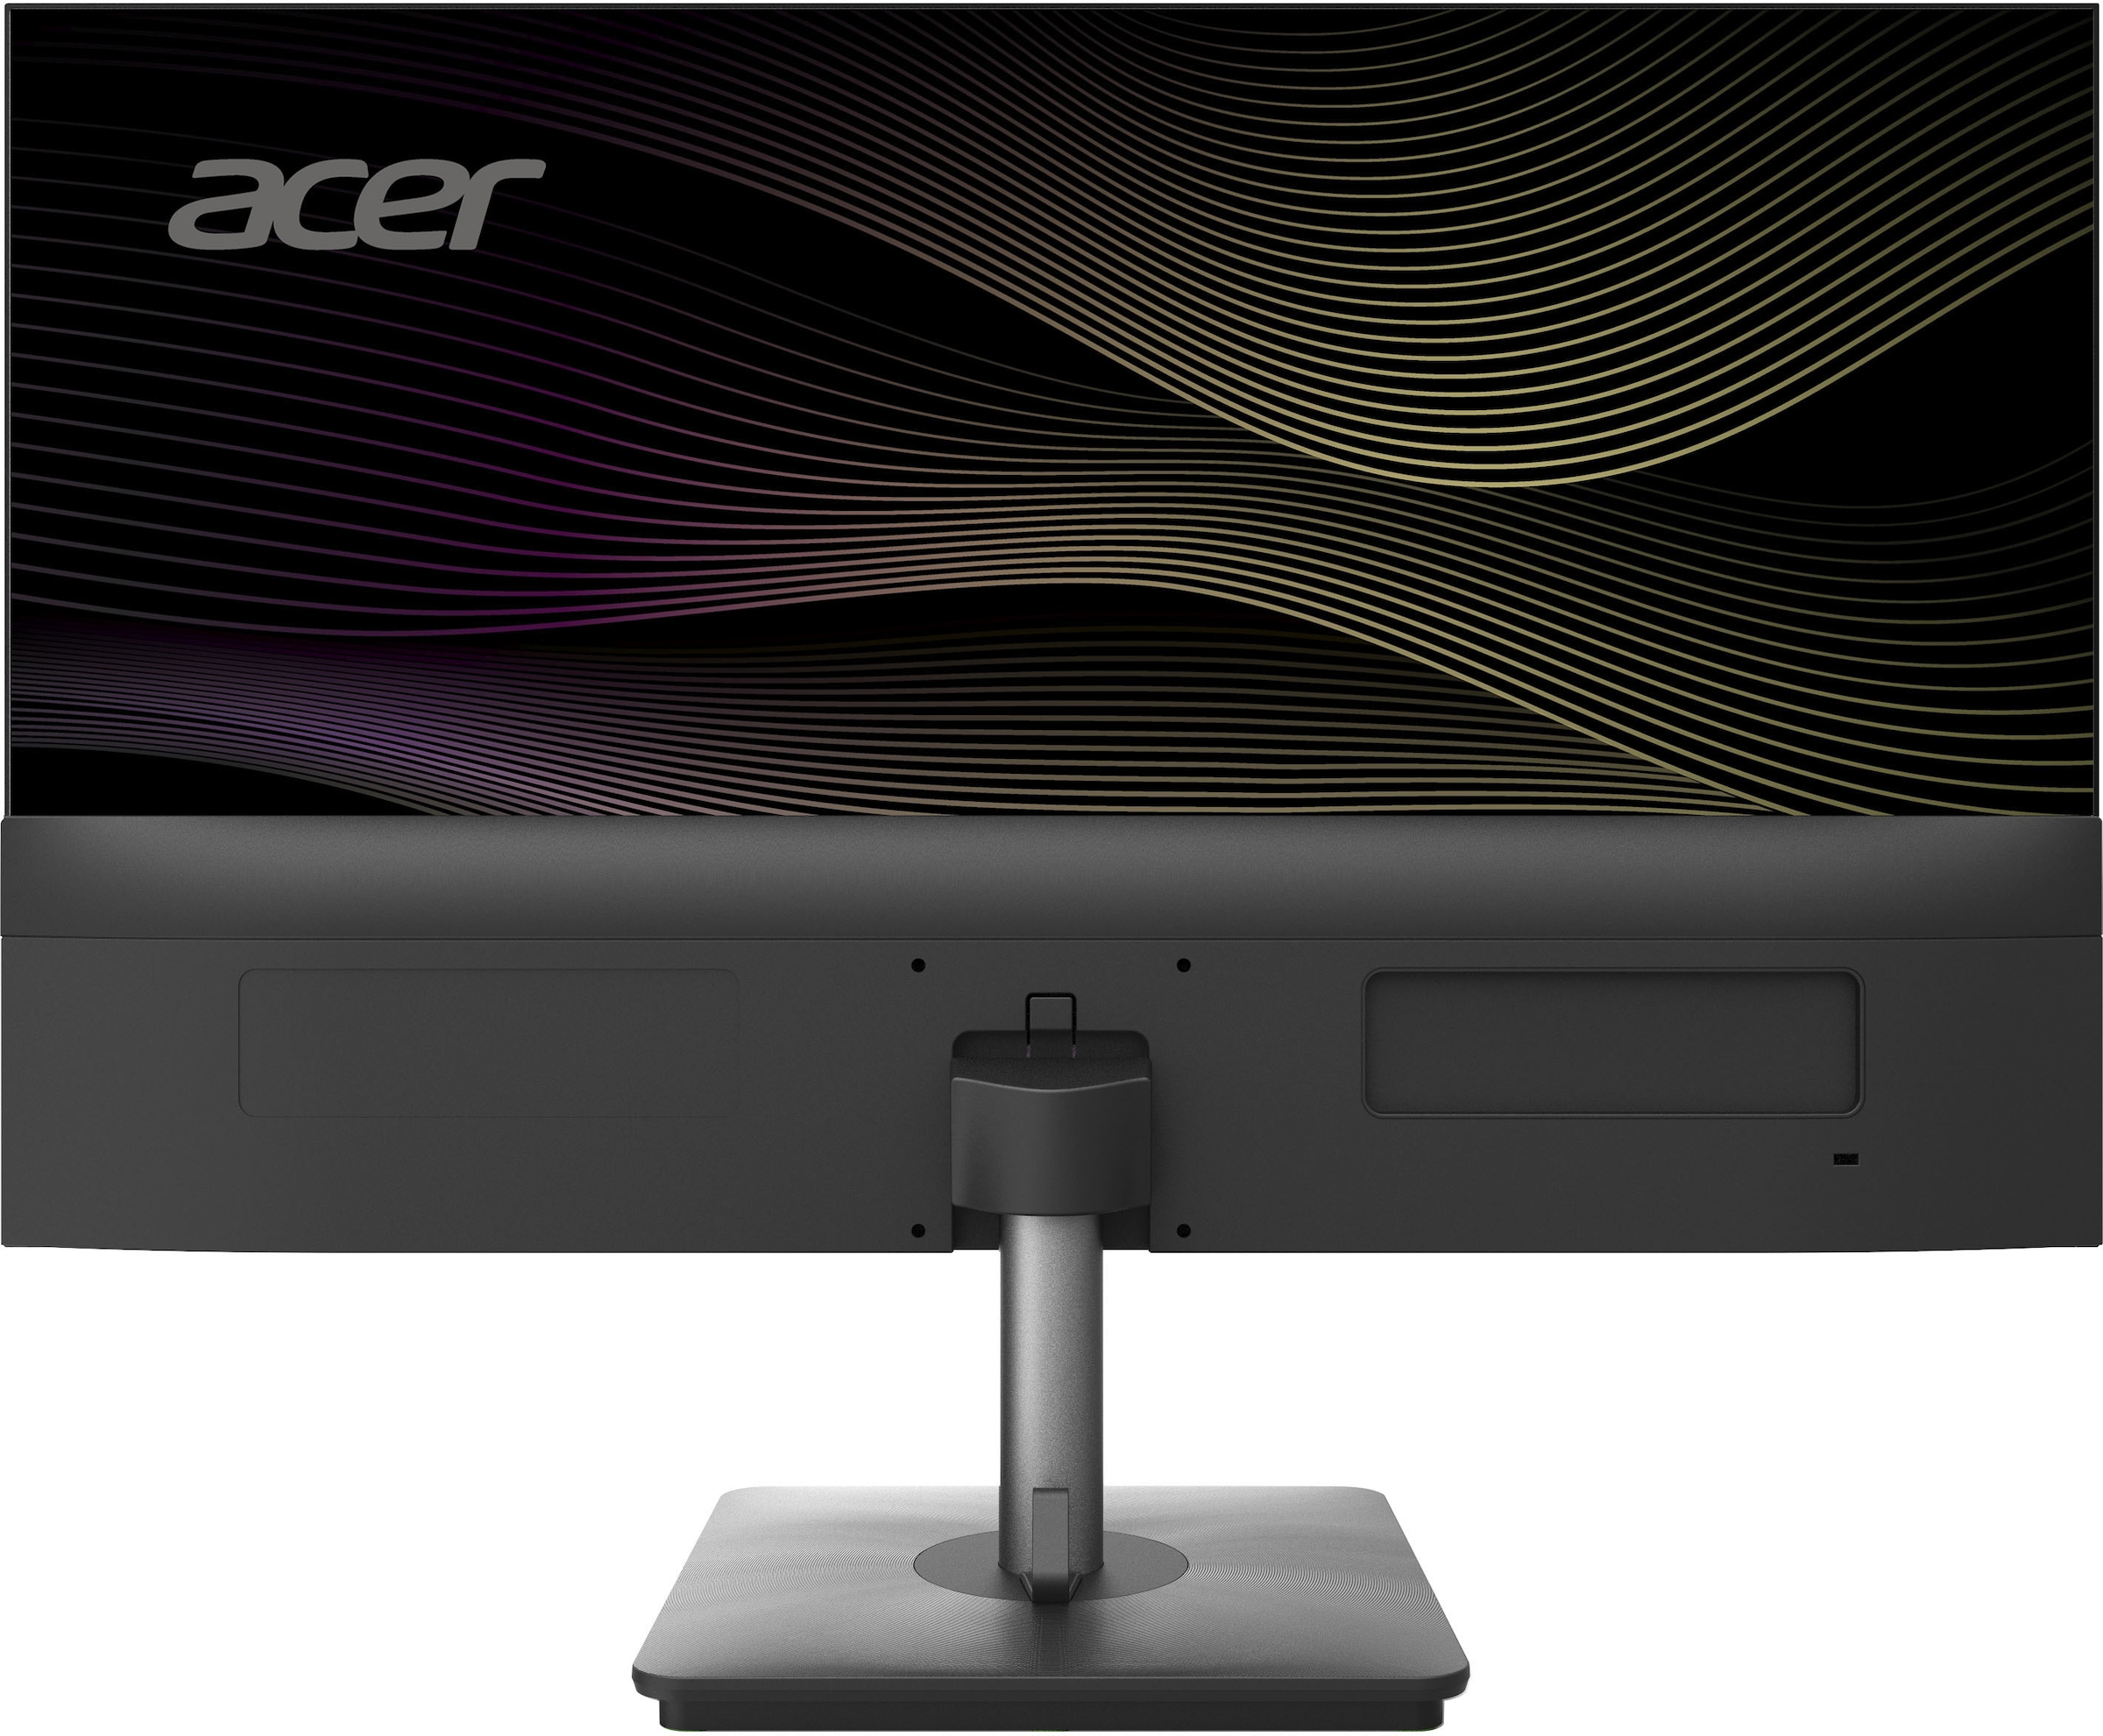 Acer LED-Monitor »Vero RS272«, 69 cm/27 Zoll, 1920 x 1080 px, Full HD, 1 ms Reaktionszeit, 100 Hz